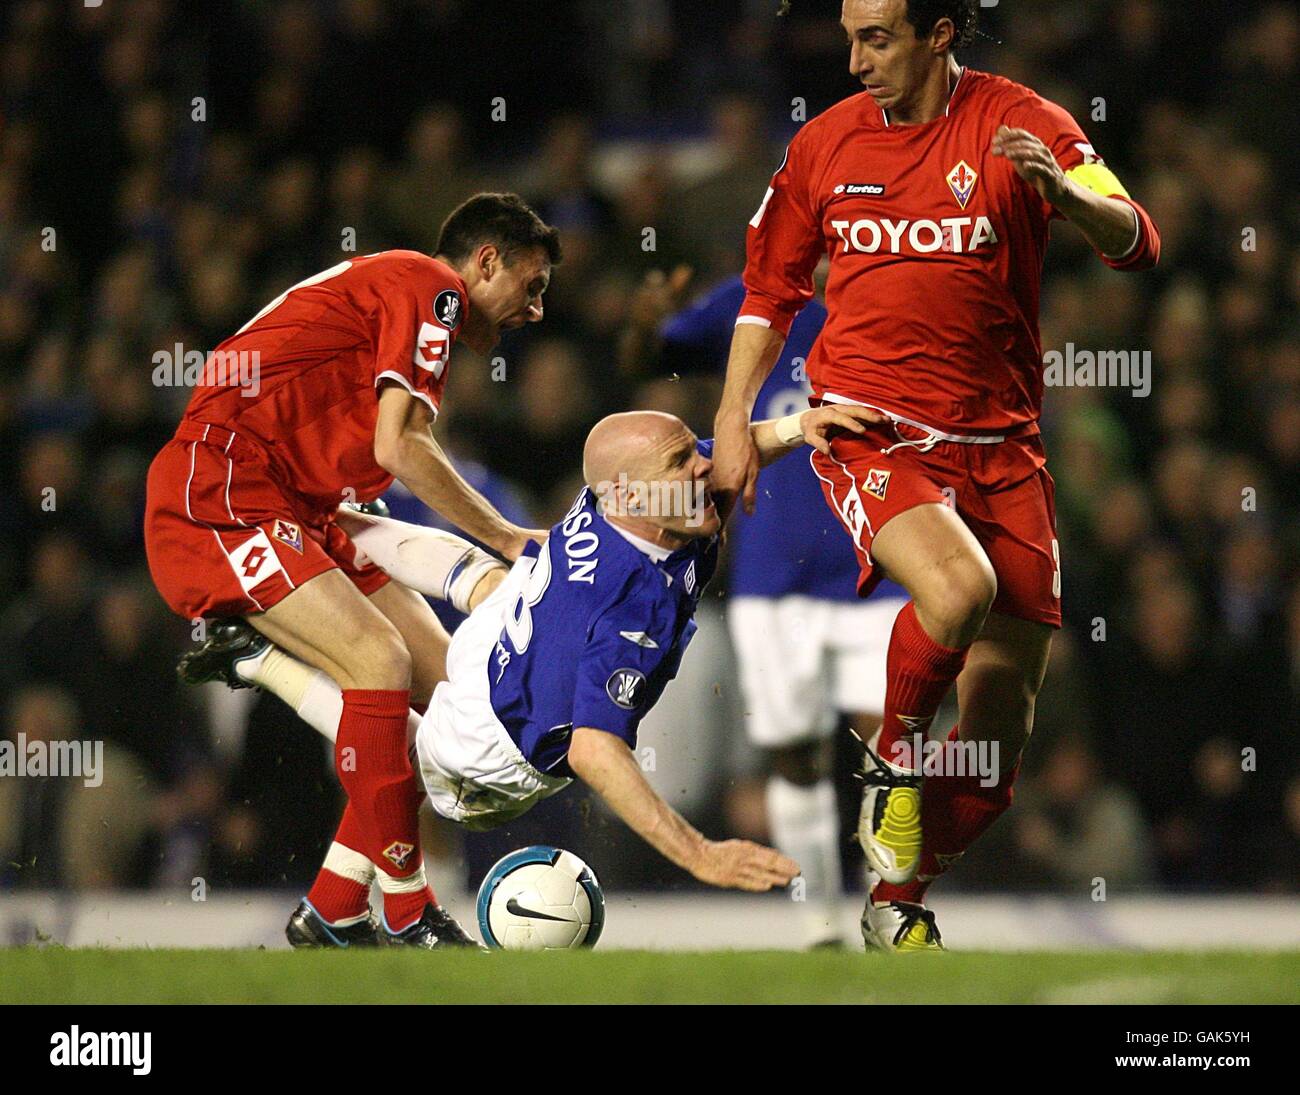 Everton's Andrew Johnson (c) battles for the ball with Fiorentina's Manuel Pasqual (l) and Dario Dainelli (r) Stock Photo